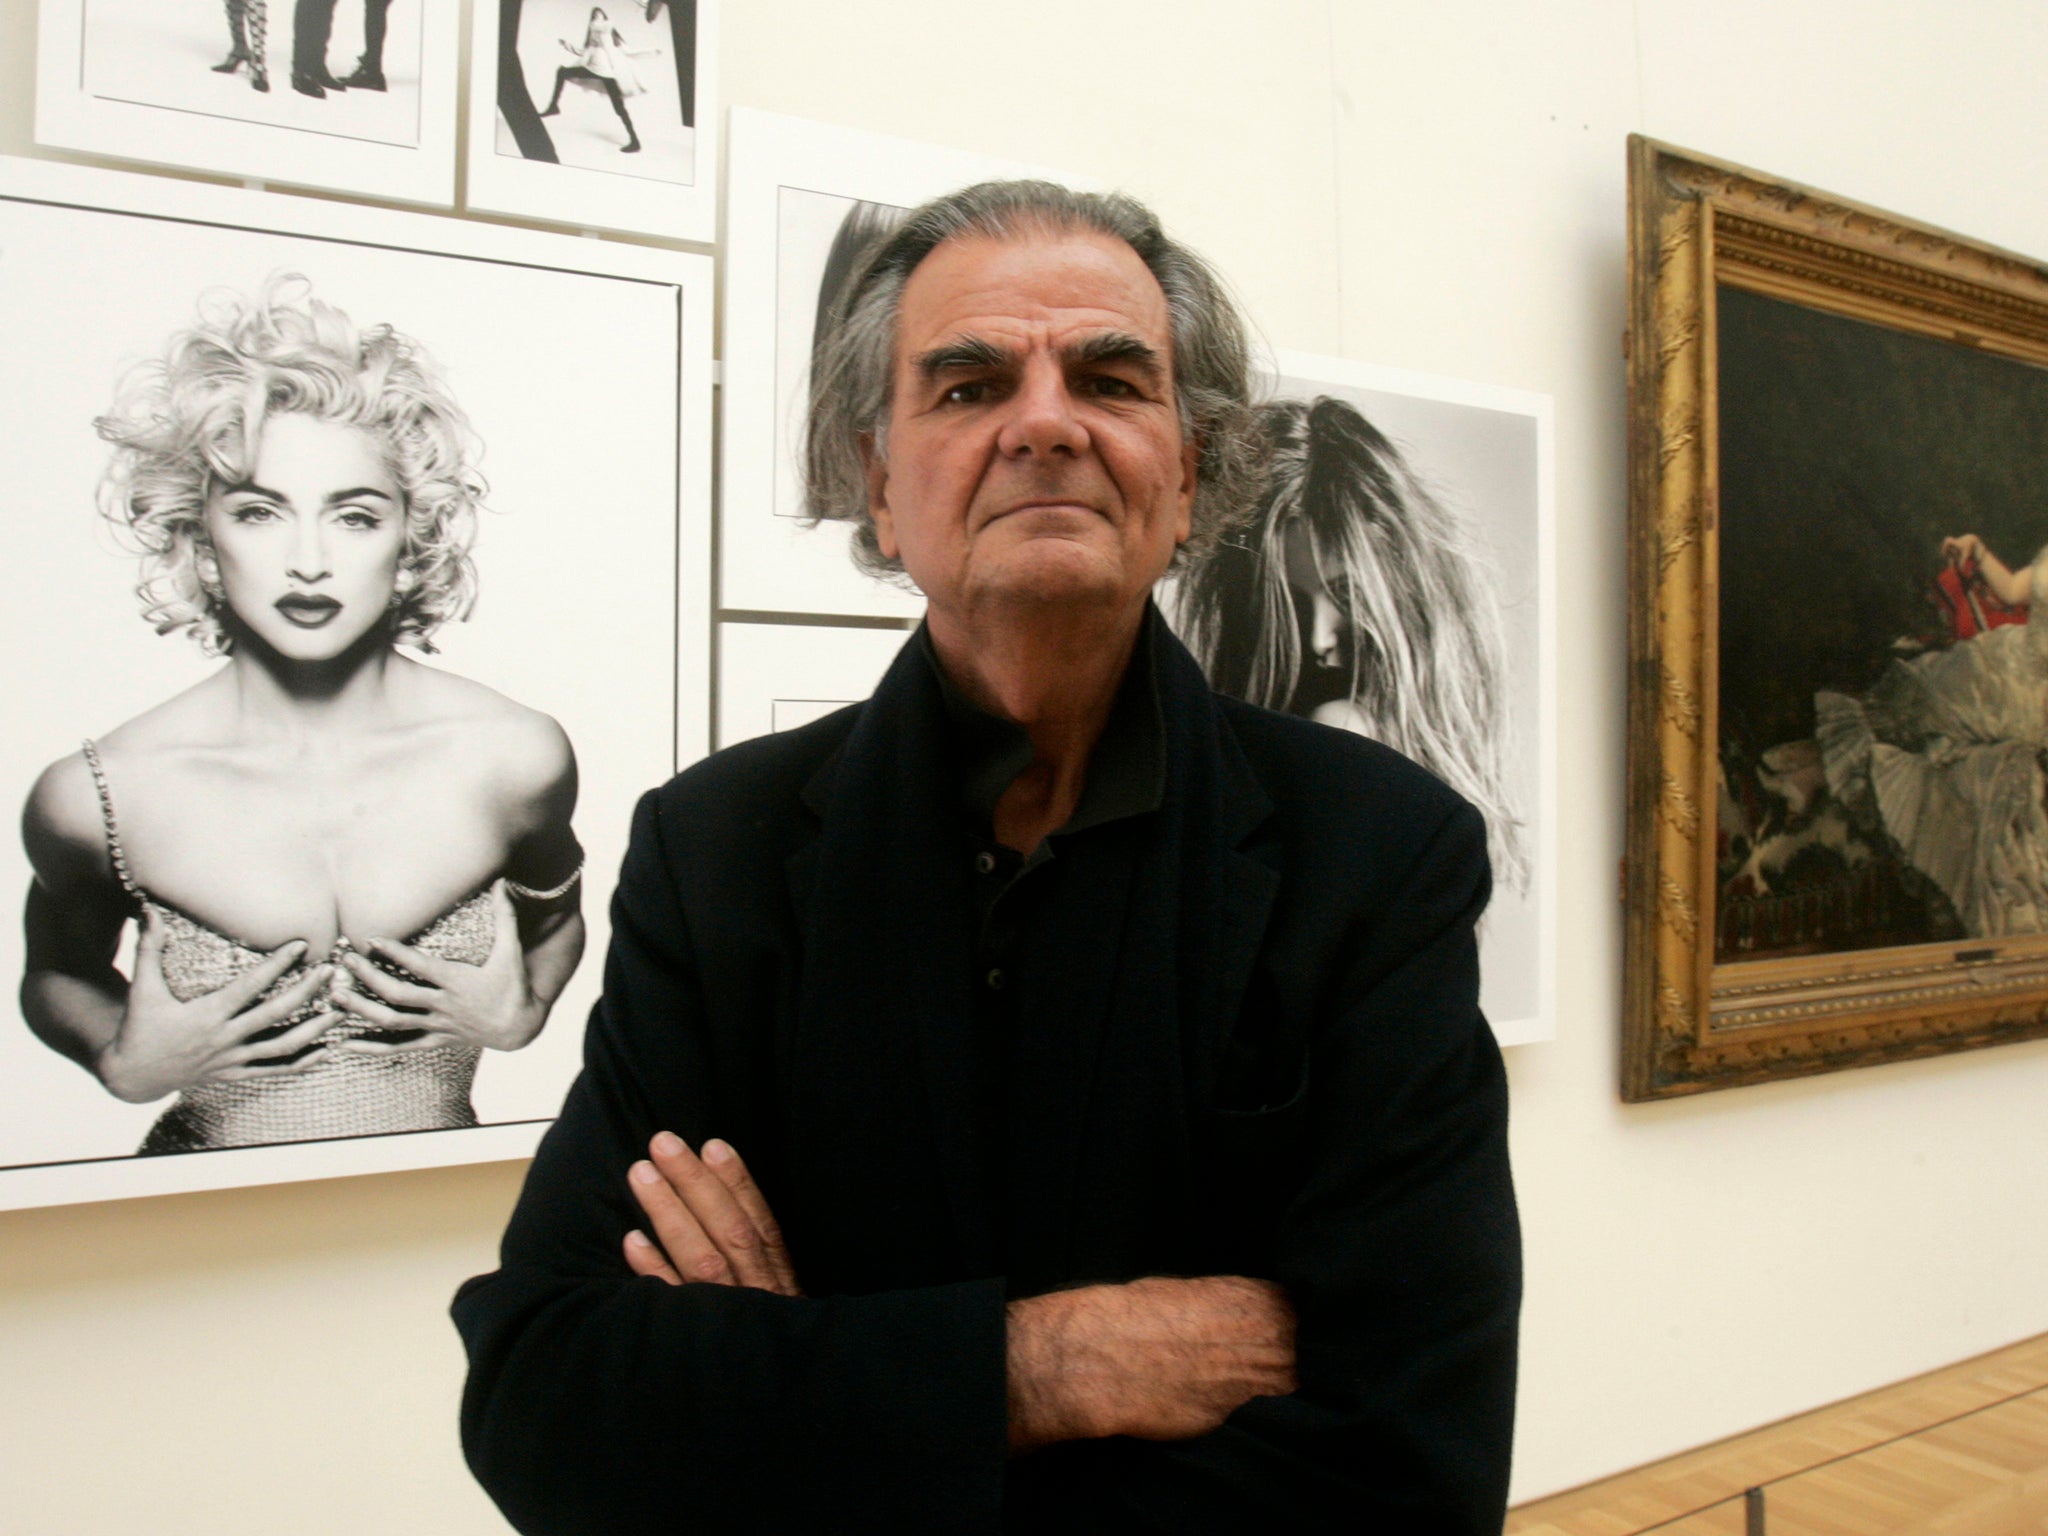 Demarchelier with one of his photographs of Madonna on display at the Petit Palais in Paris